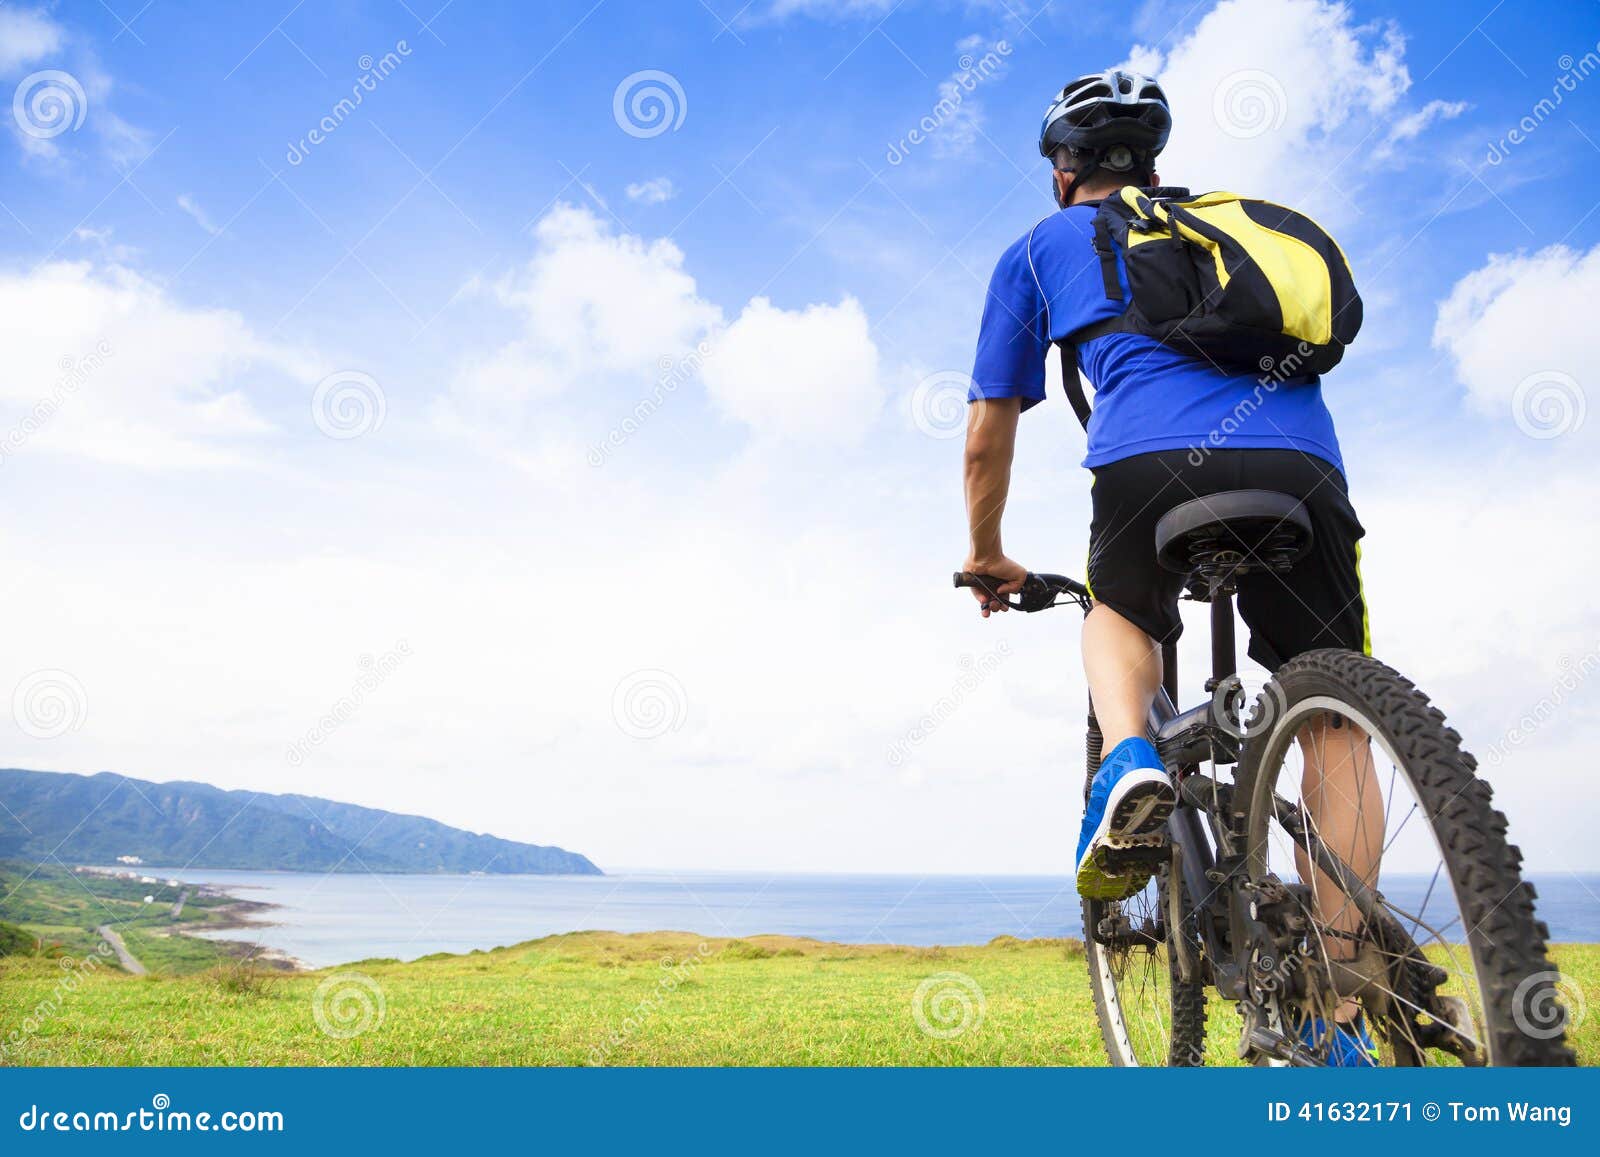 young man sitting on a mountain bike and looking the ocean